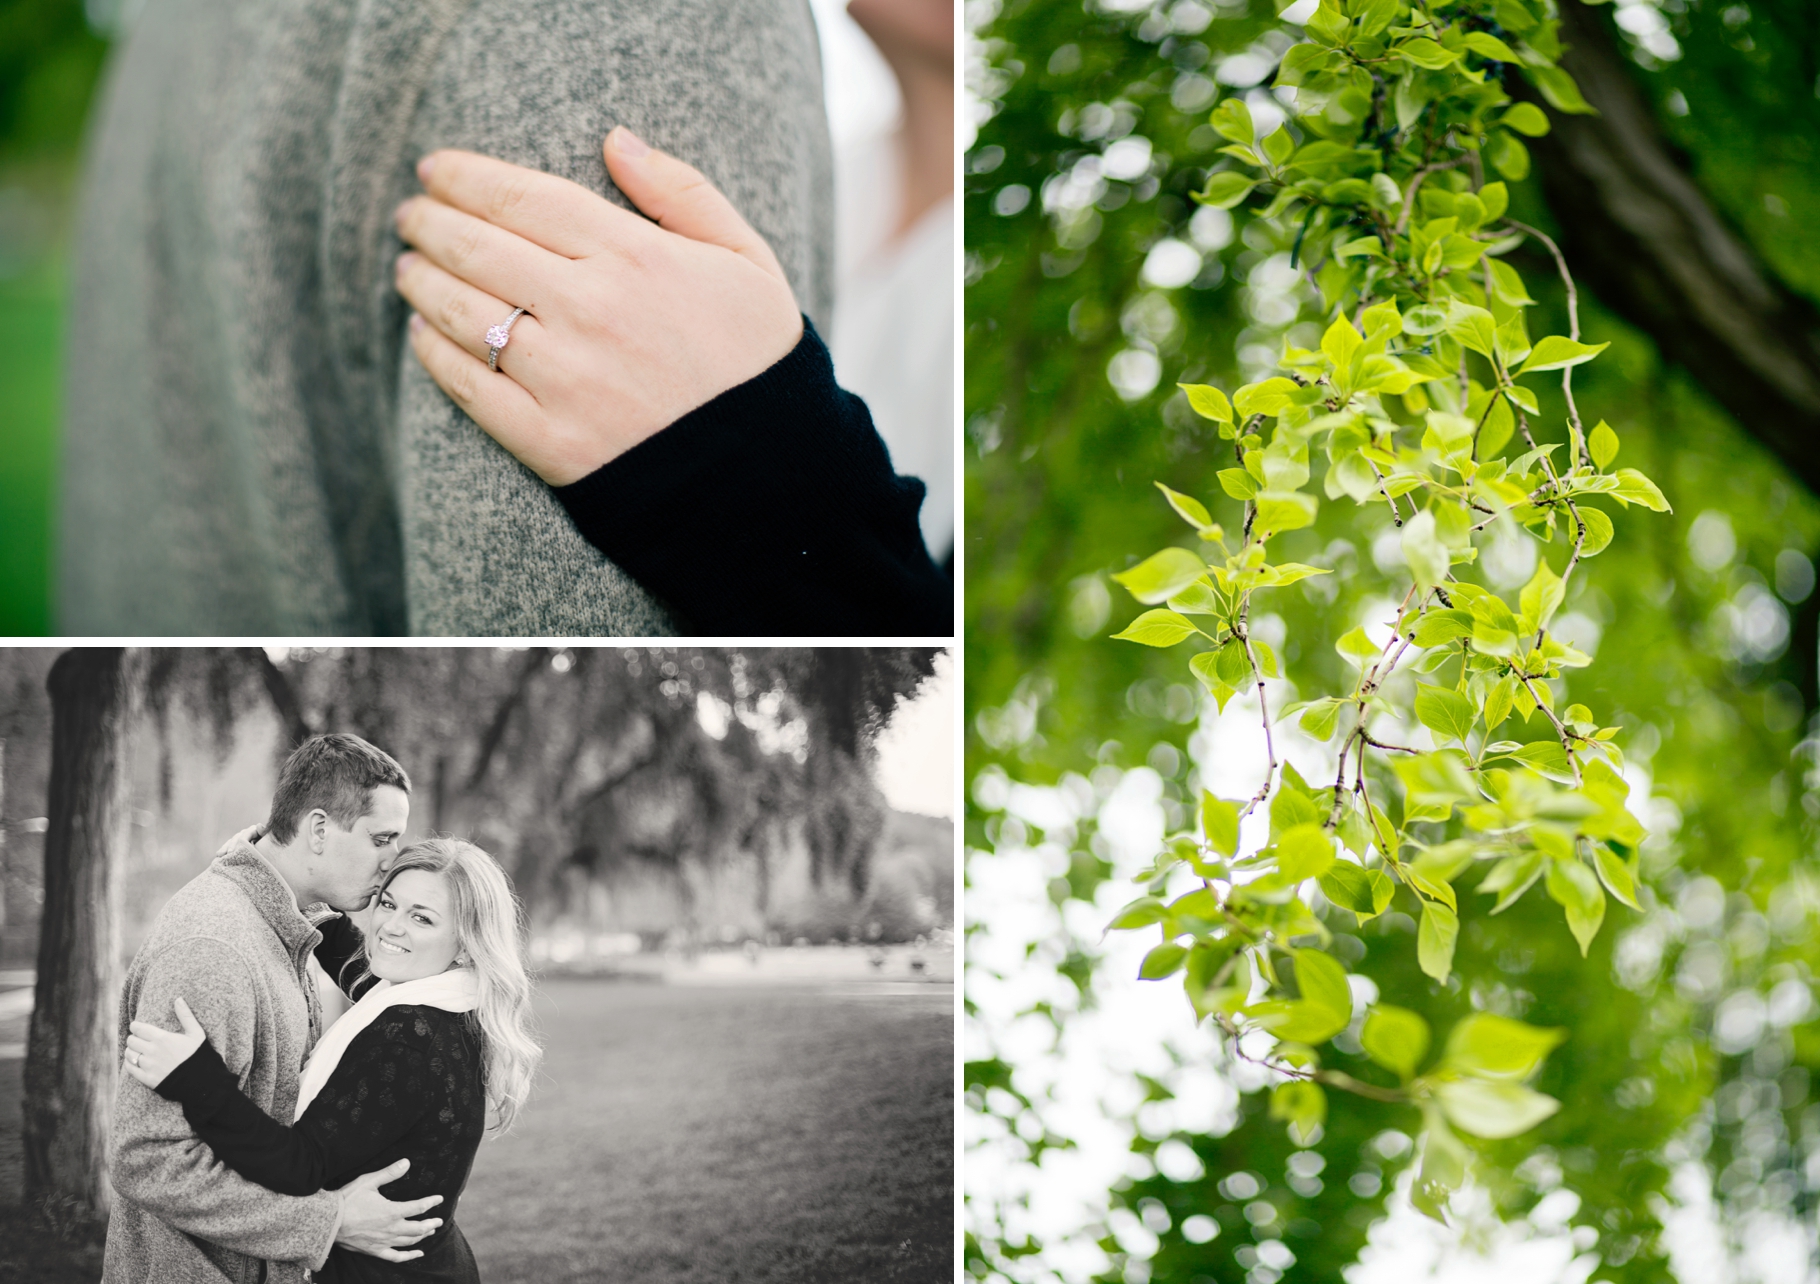 3-Engaged-Golden-Gardens-Park-Ballard-Spring-Engagement-Ring-Willow-Tree-Rainy-Day-Seattle-Photographer-Wedding-Photography-by-Betty-Elaine